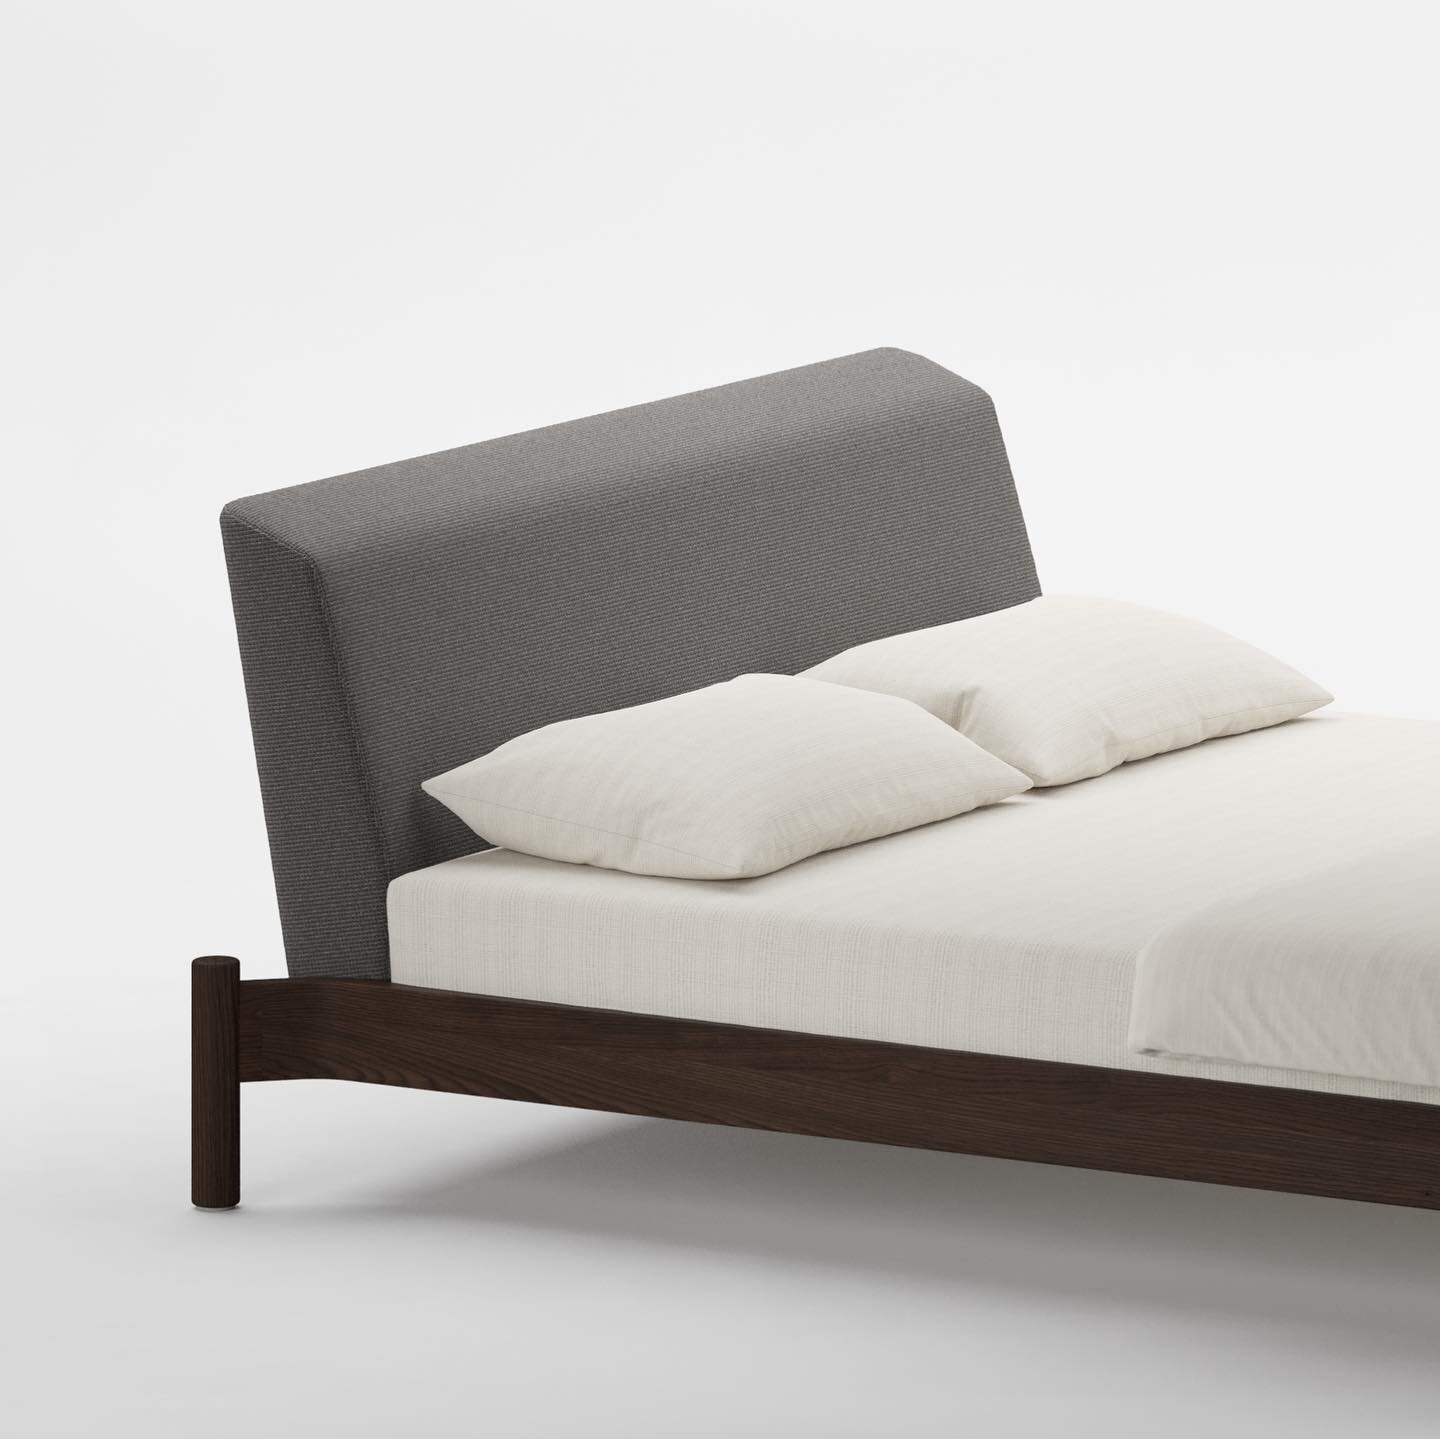 Launching &quot;Ether&quot; for @metoda_collection this week at @isaloniofficial in Milan! Our bed is designed with comfort and relaxation in mind, featuring an upholstered backrest available in two heights, perfect for late-night reading or just sim